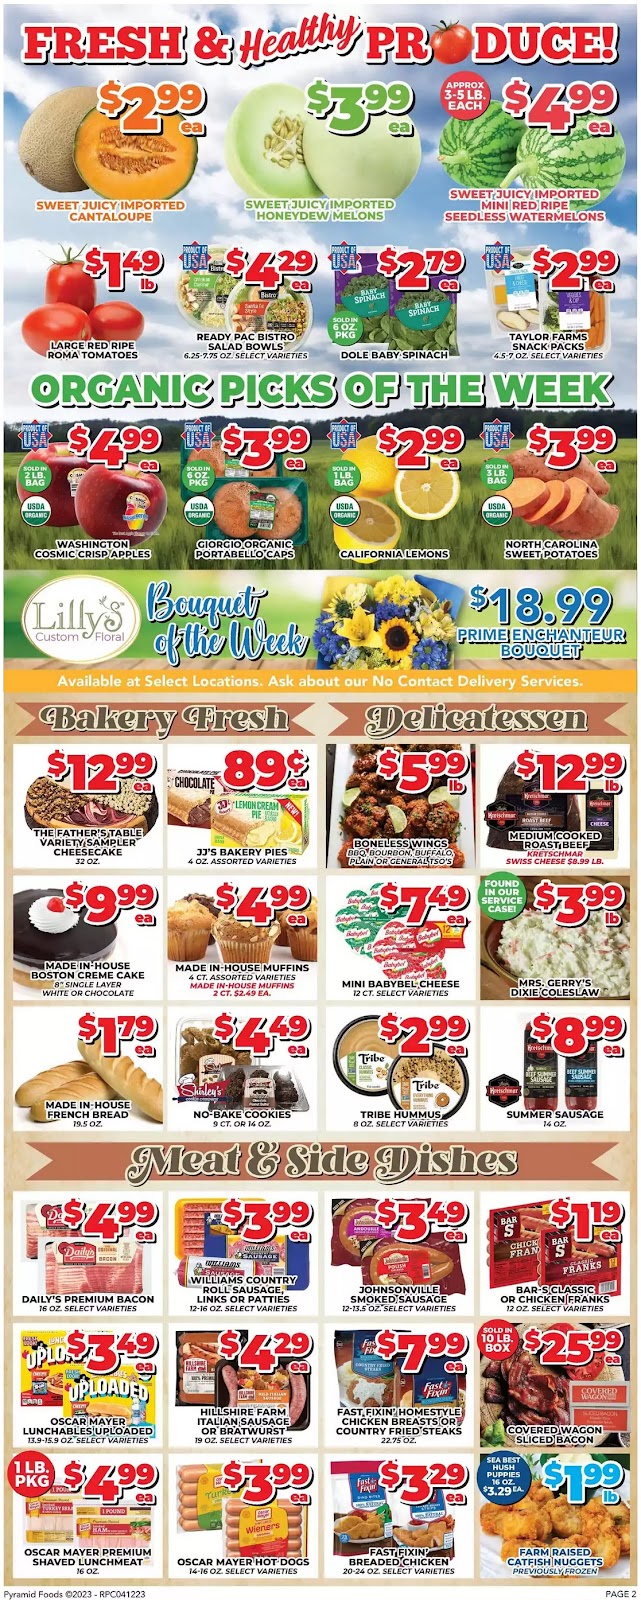 Price Cutter Weekly Ad - 2